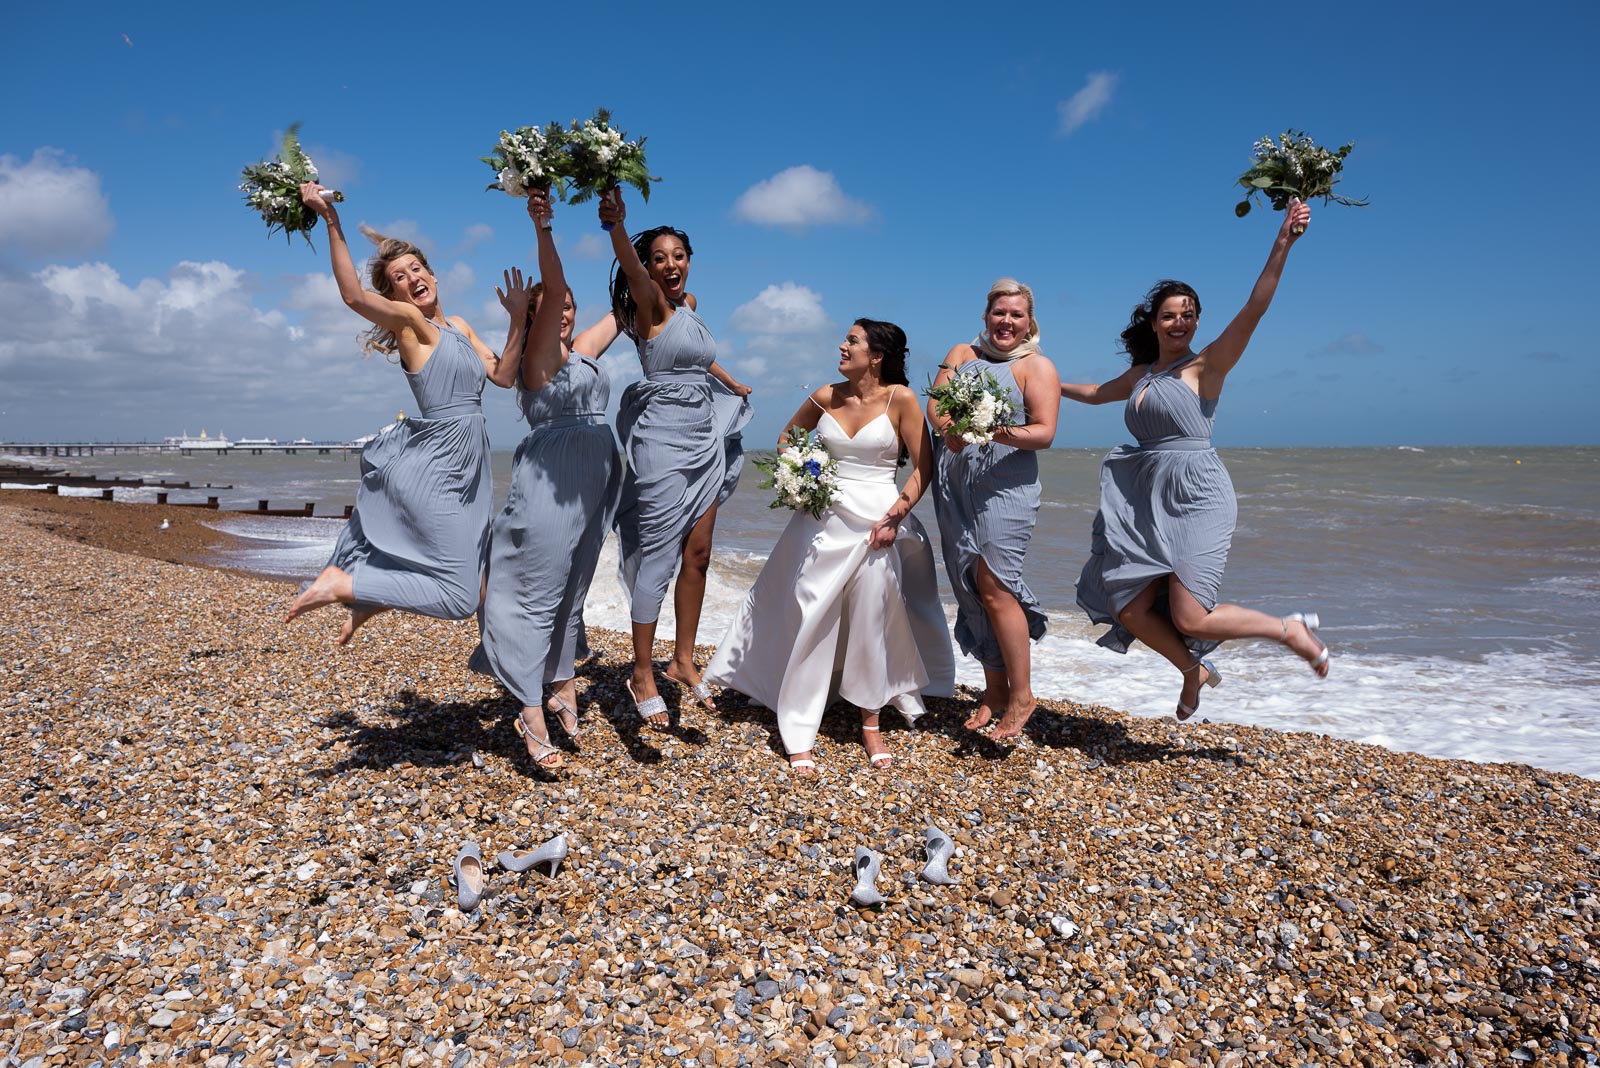 Wedding Photographer for Ally and Jane at The Grand Hotel in Eastbourne